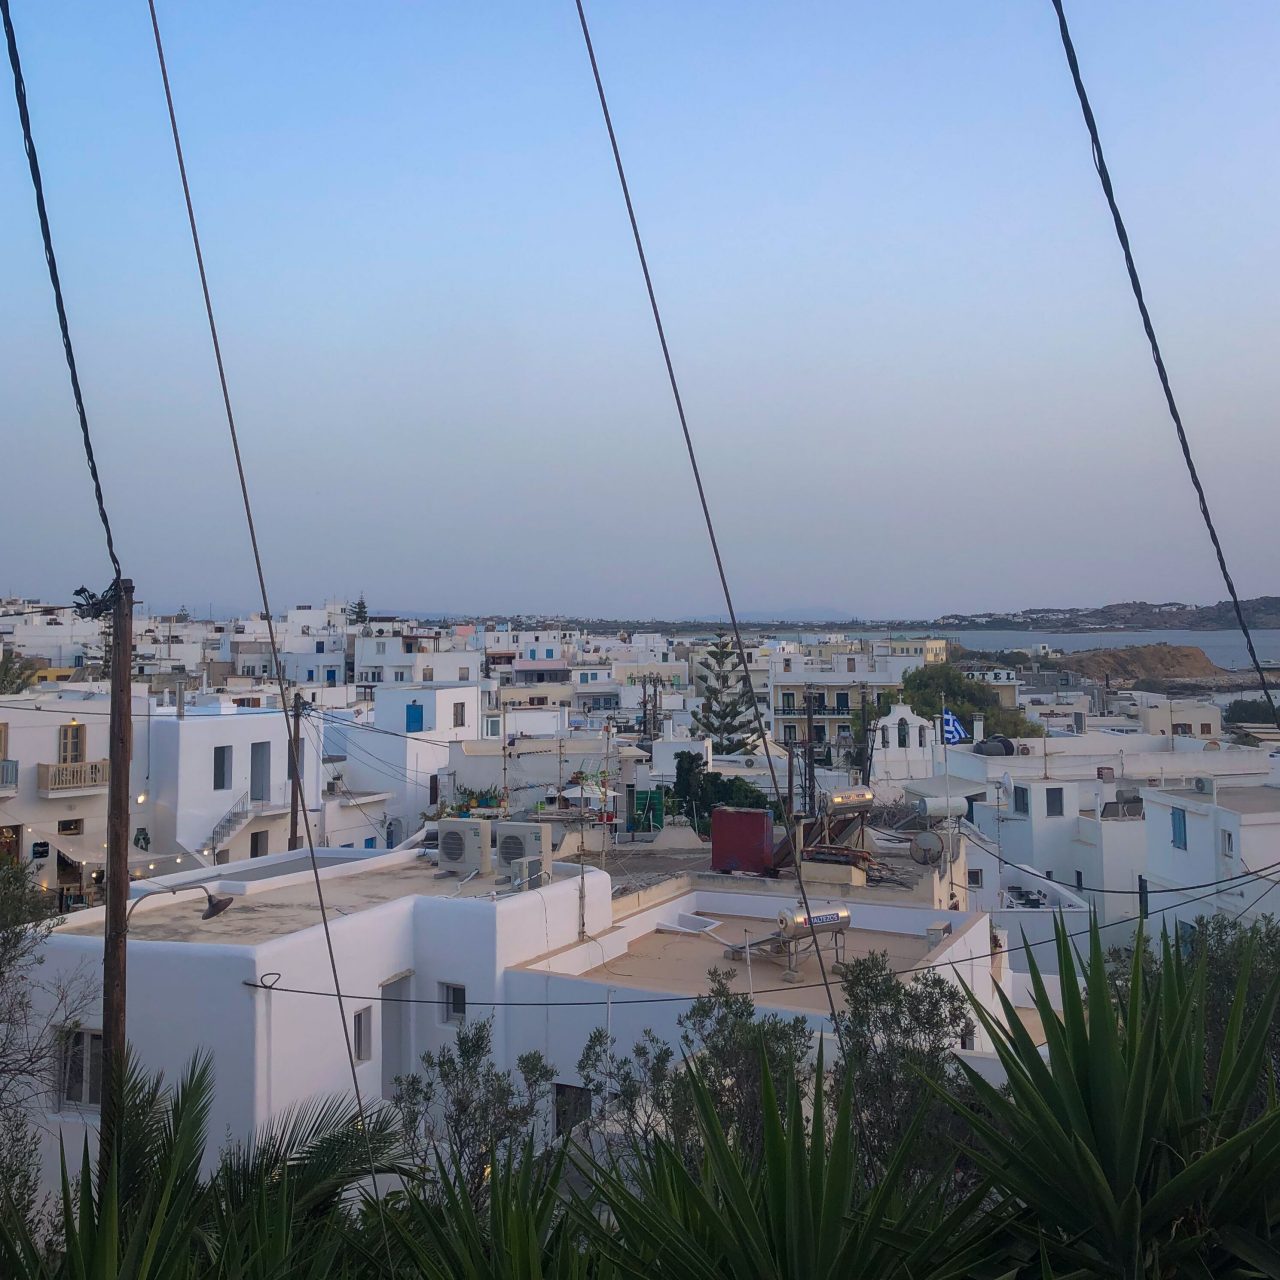 Bird's eye view of white-washed buildings in Naxos